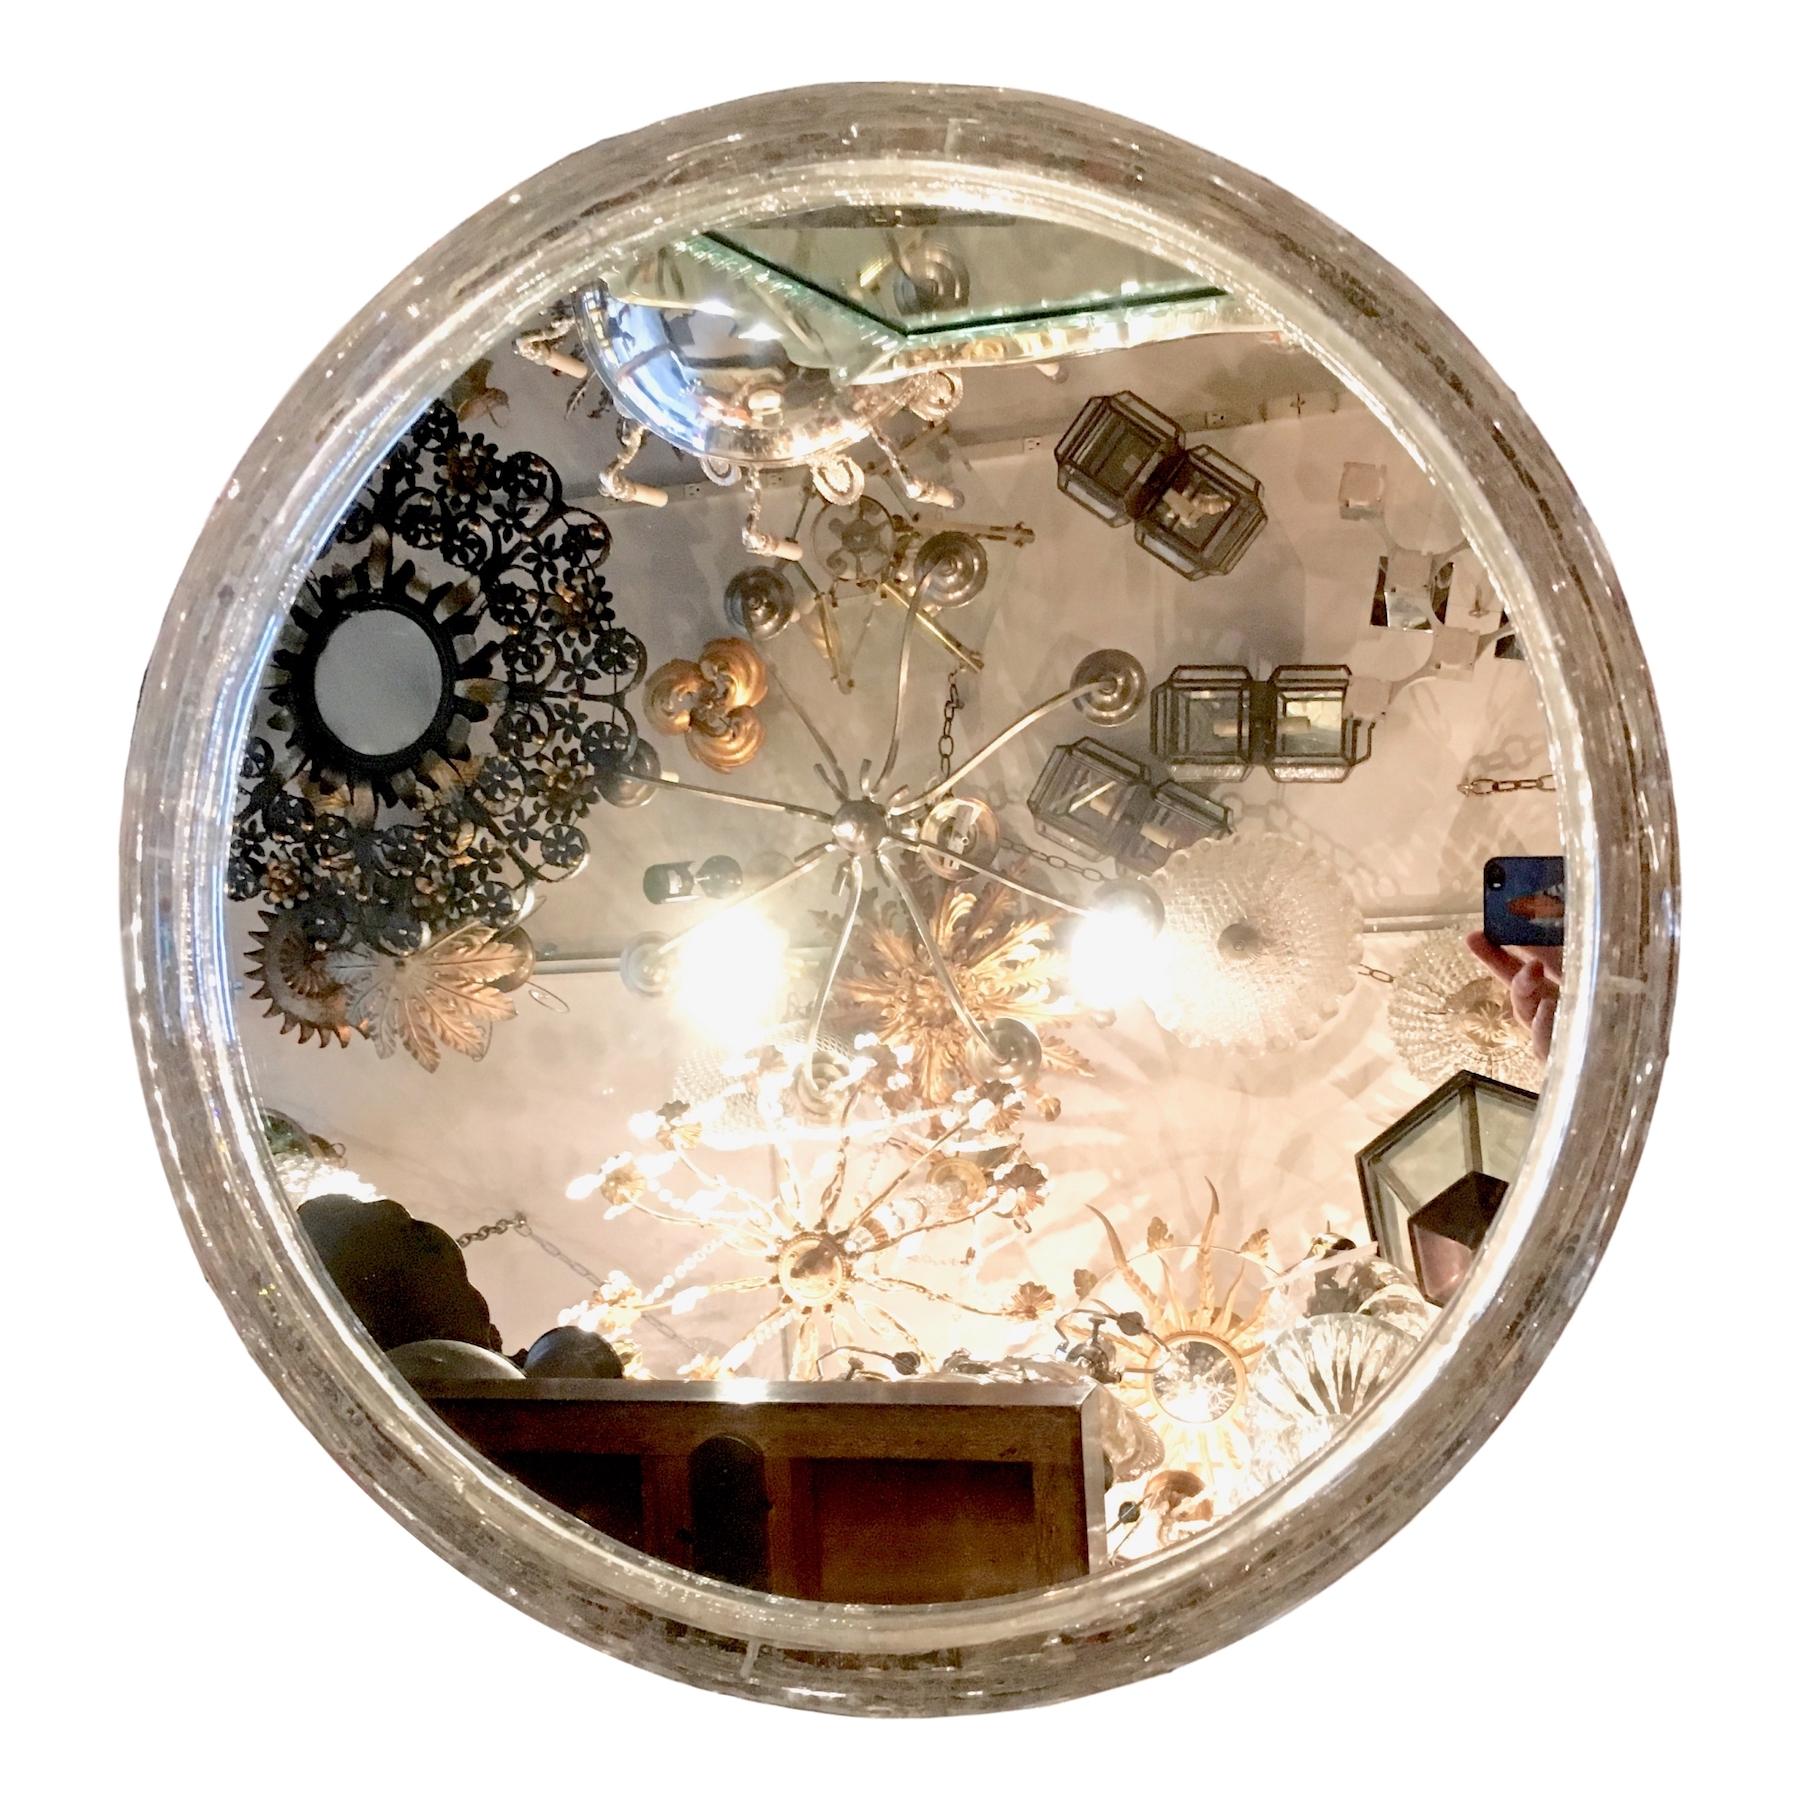 Circa 1960’s French Moderne style mirror in textured resin frame with interior lights.

Measurements:
Diameter: 23.5?
Depth: 3.5?.